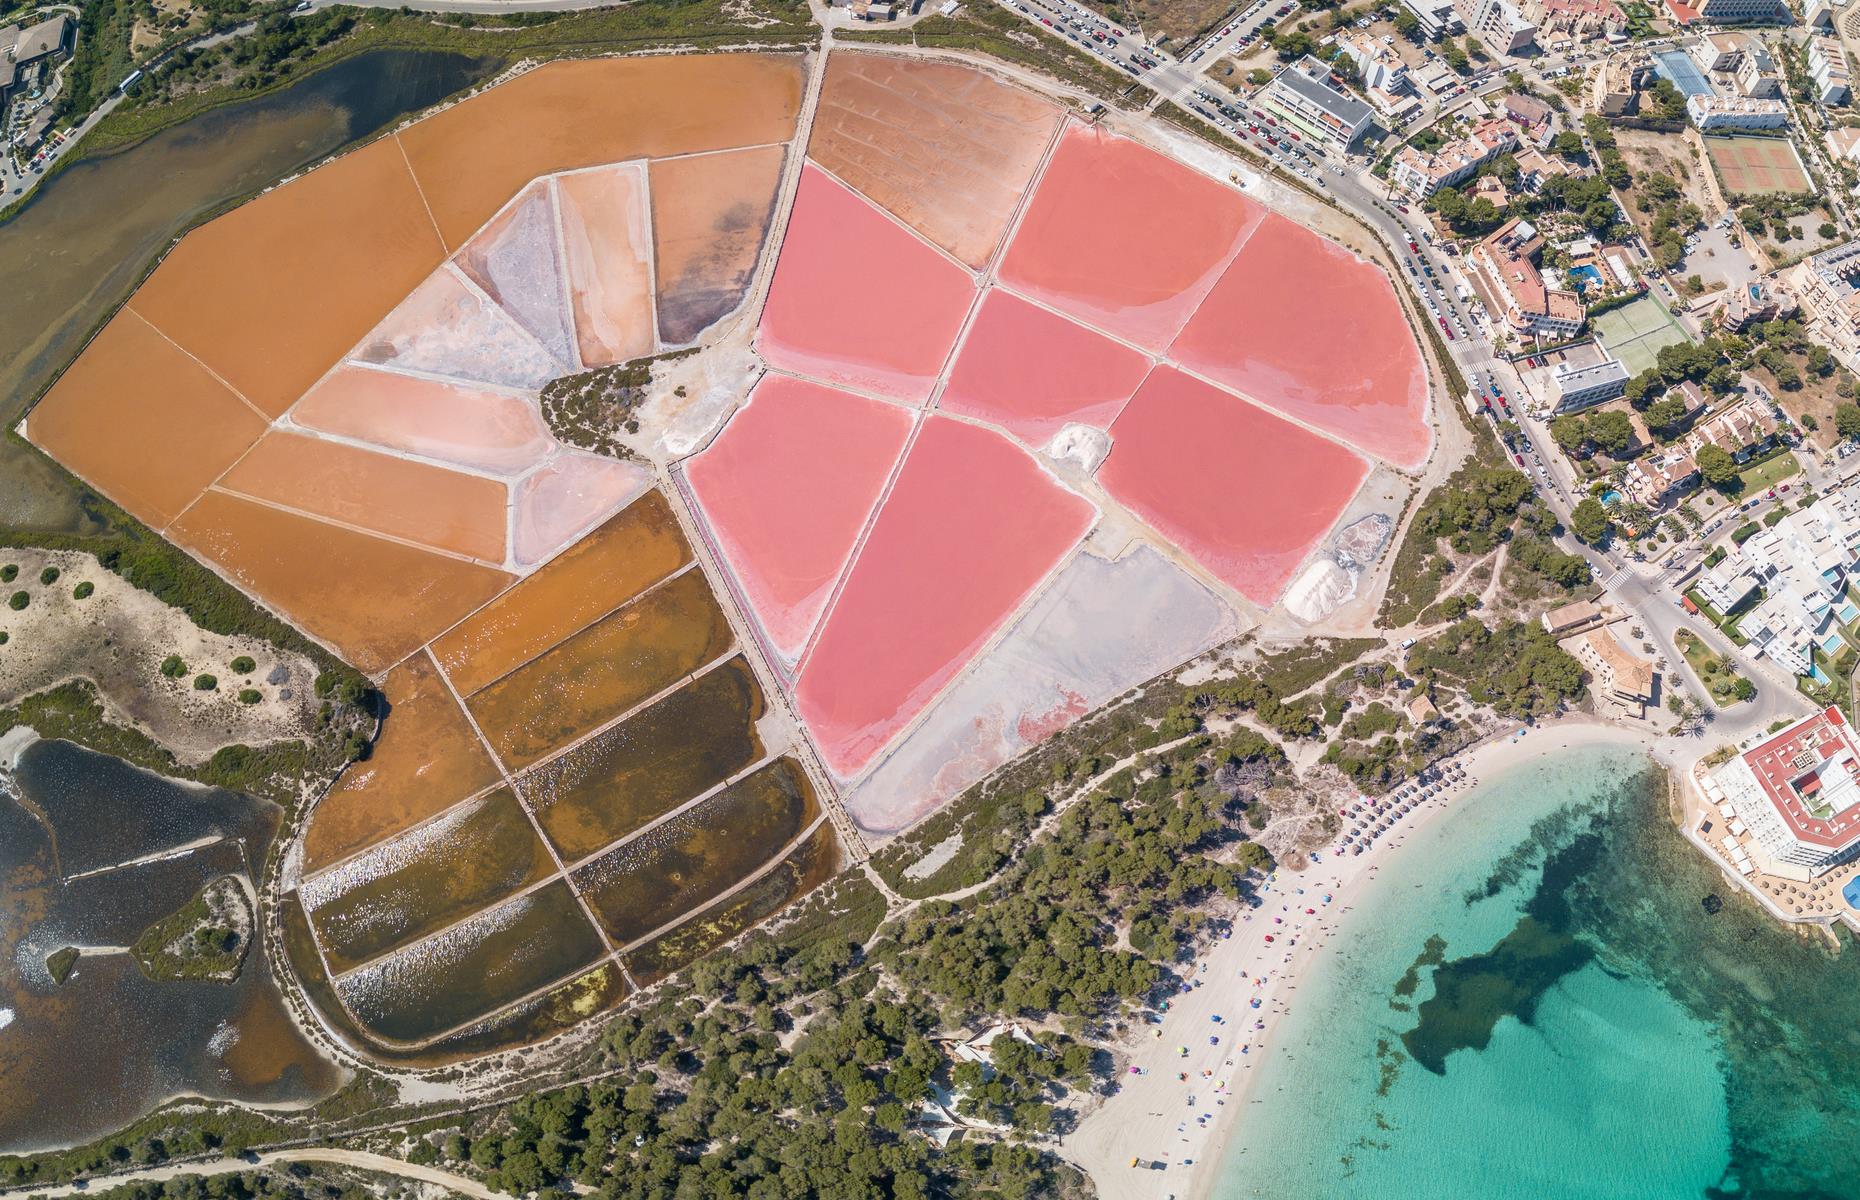 Resembling a magnificent paint palette of corals, pinks, and browns, the salt lakes of Colonia Sant Jordi are spectacular from the skies. Situated on the south coast of Mallorca, more than 10,000 tons of speciality “Flor de Sal” sea salt are mined from here each year.